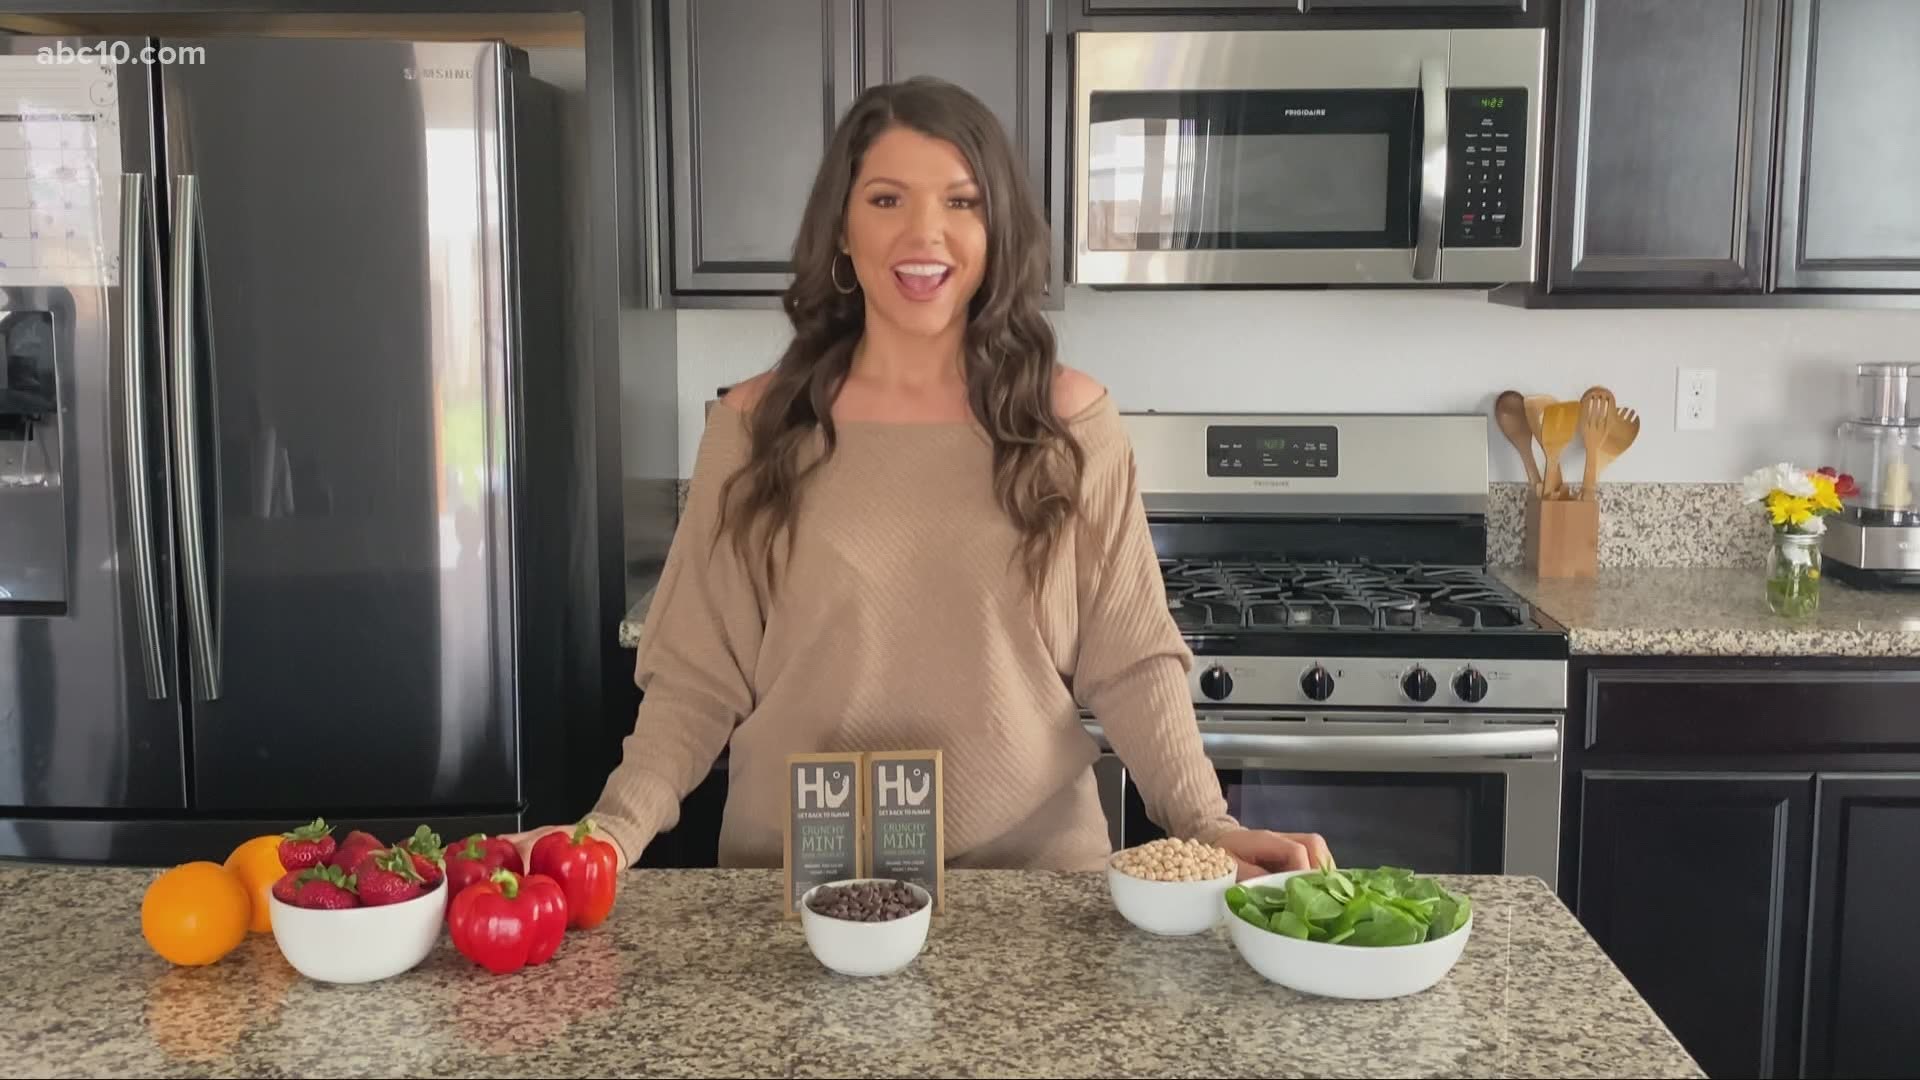 Stay-at-home orders got you down? Megan Evans joins us, sharing some foods to boost your mood that you can pick up on your next grocery run.